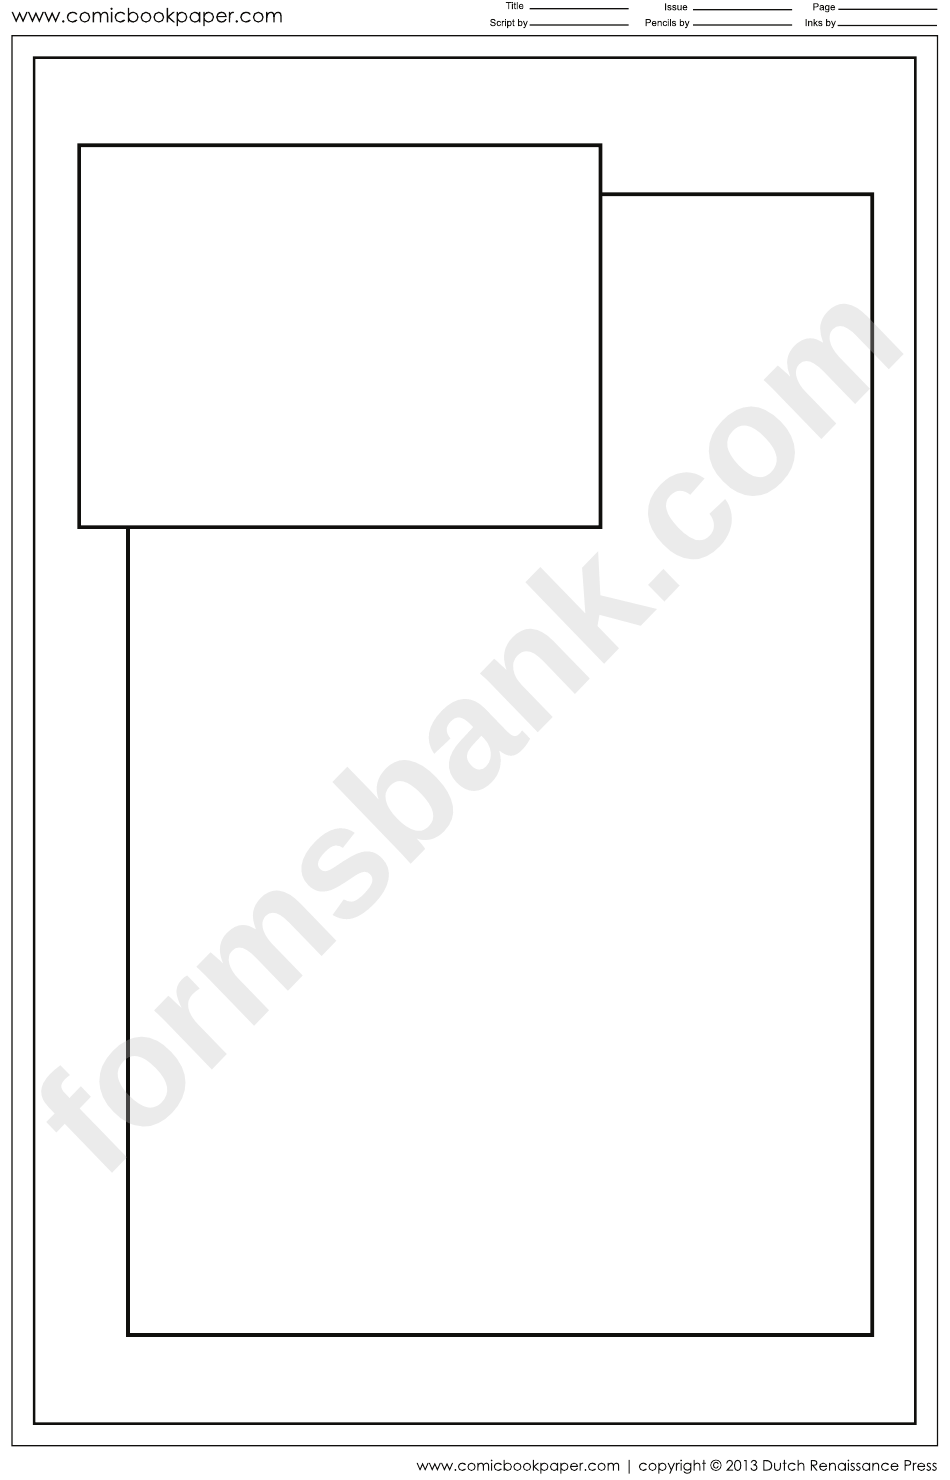 Comic Book Page Template